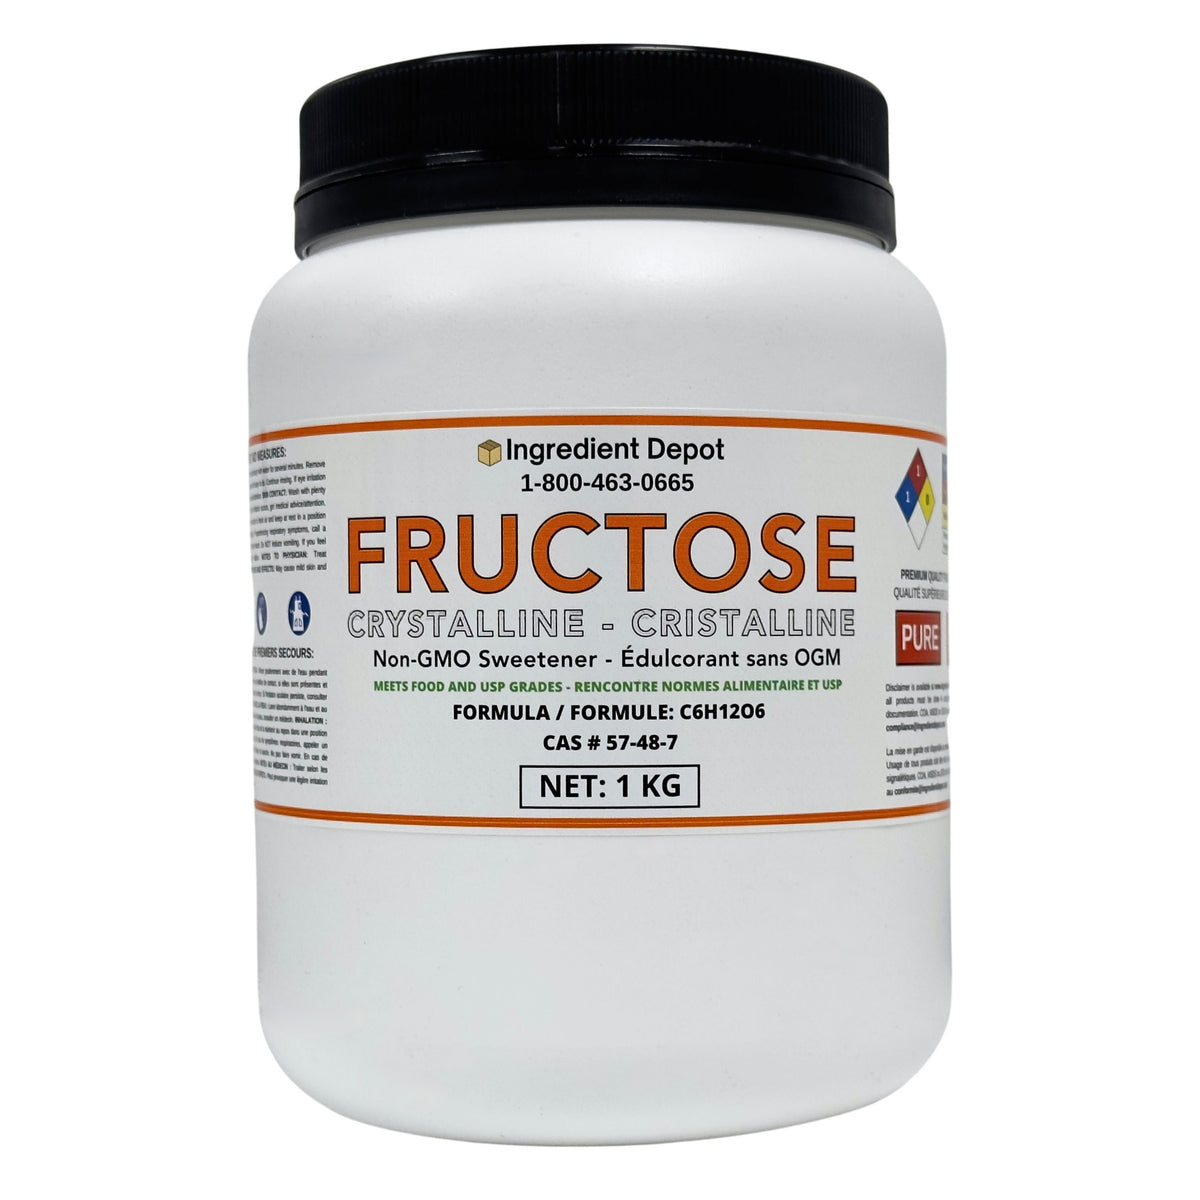 Fructose Crystalline, Food and USP Grade, Non-GMO 1 kg